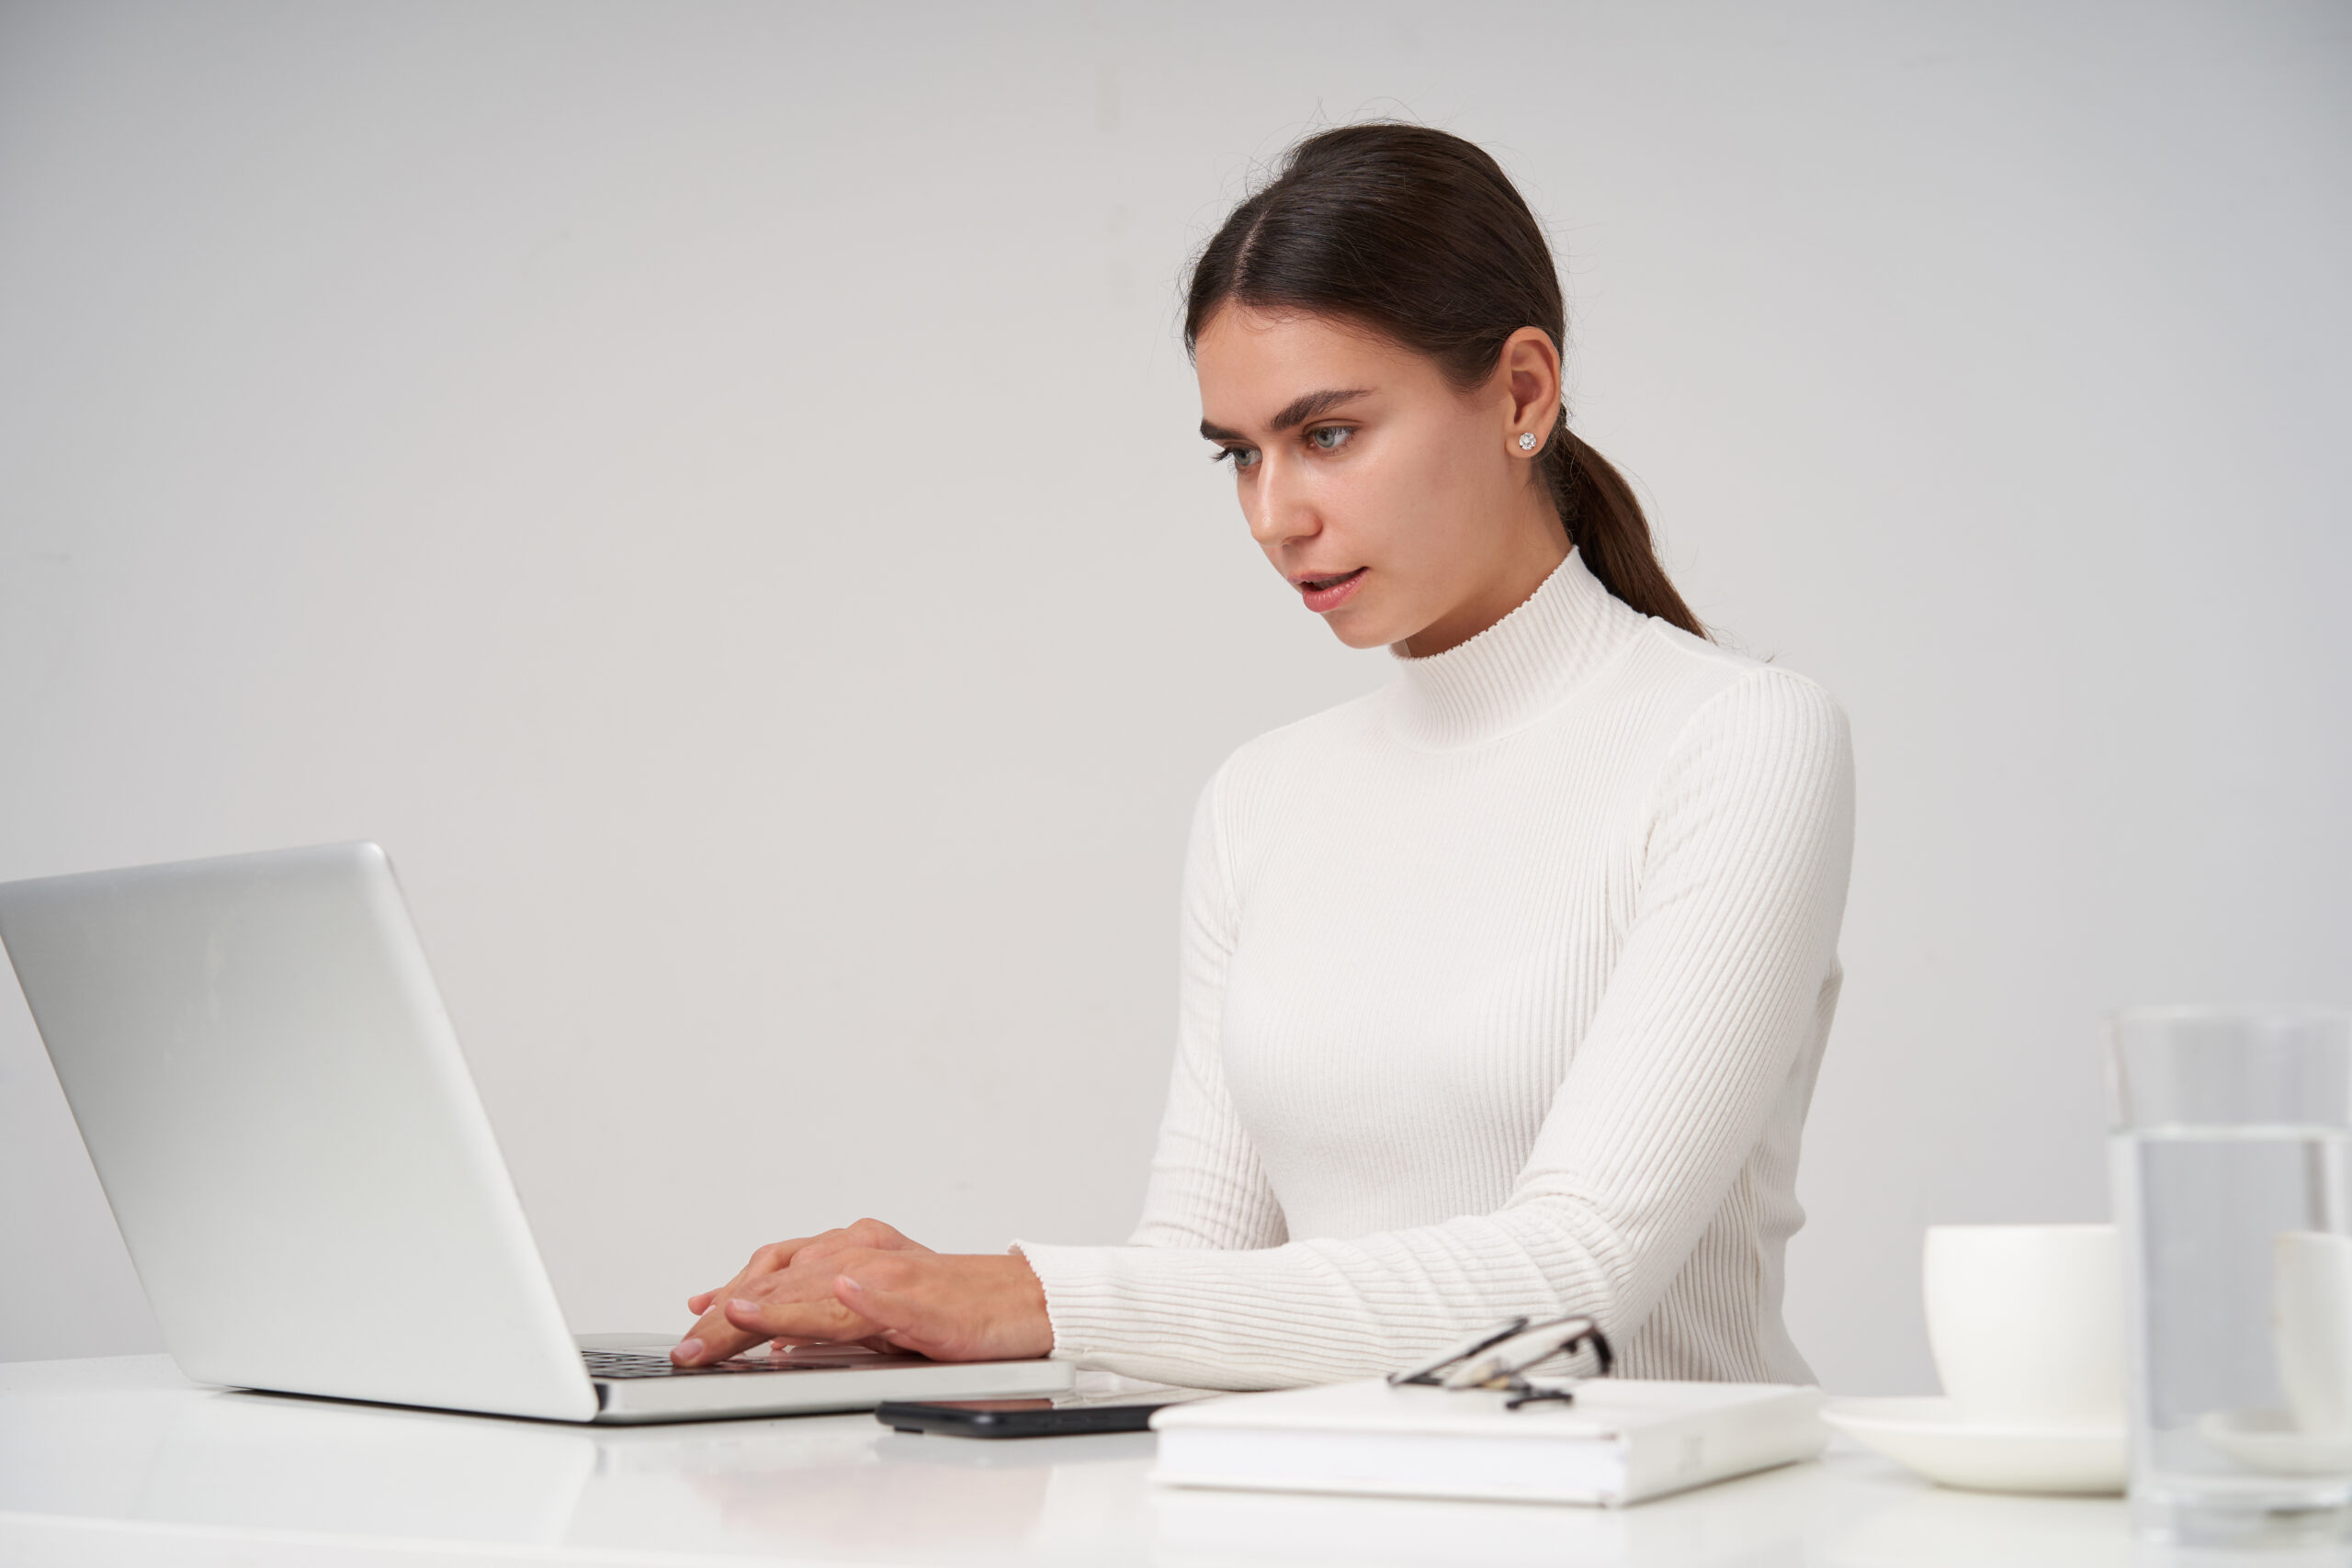 portrait-young-dark-haired-businesswoman-white-knitted-poloneck-sitting-white-wall-with-laptop-keeping-hands-keyboard-looking-screen-seriously-scaled